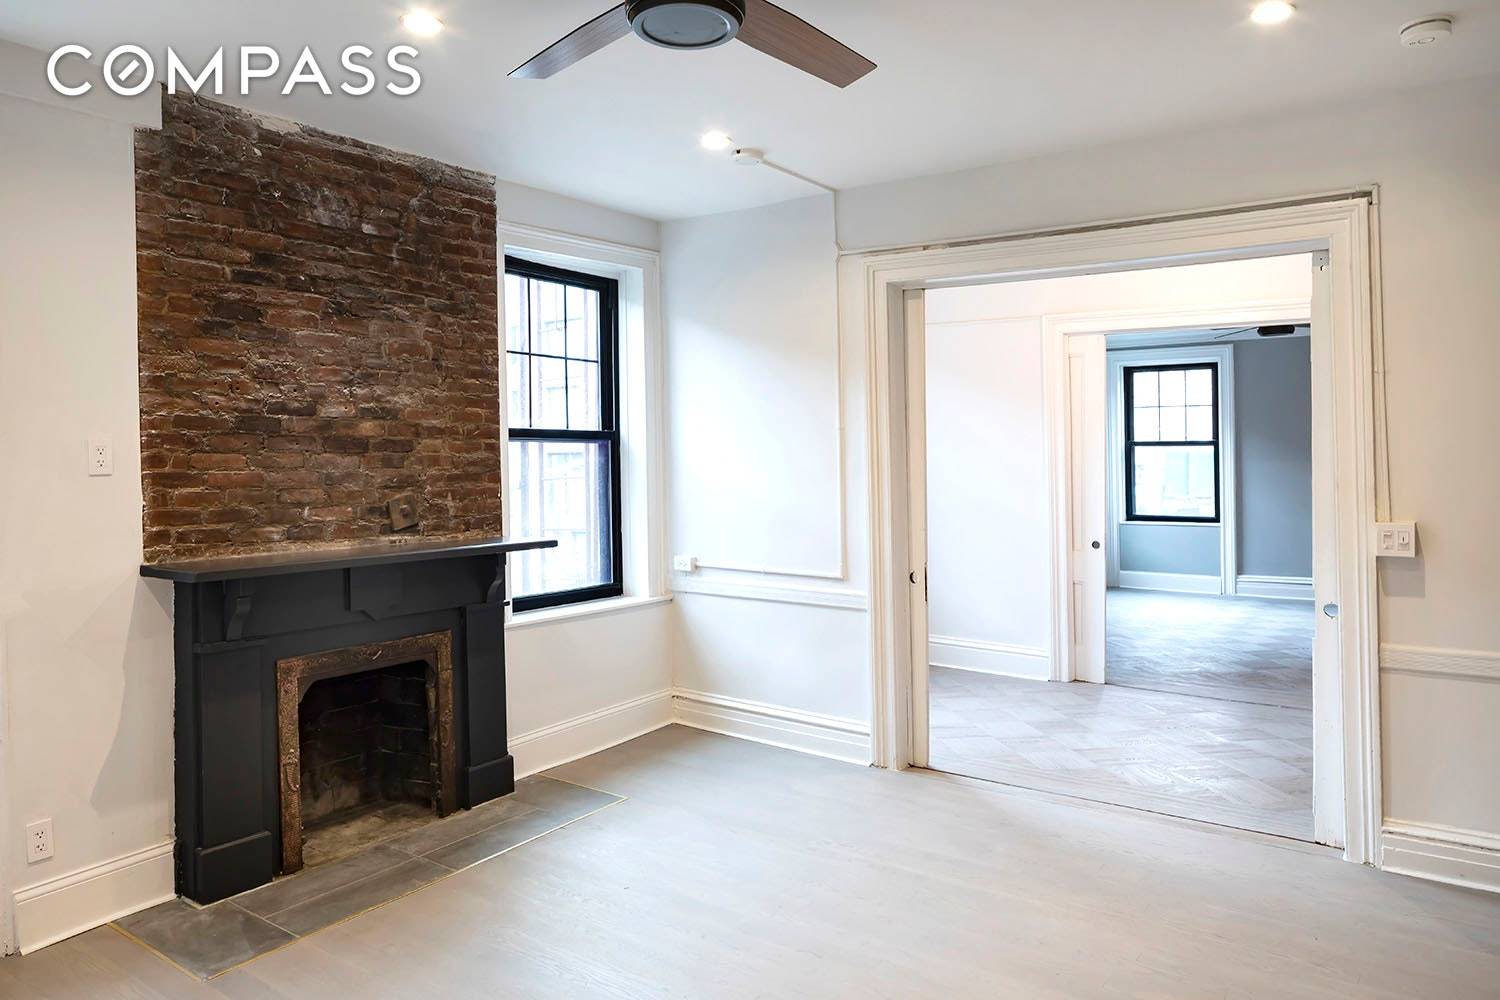 Nothing else like it on the market rare opportunity to rent a fully renovated one bedroom office floor through apartment in prime Boerum Hill location.